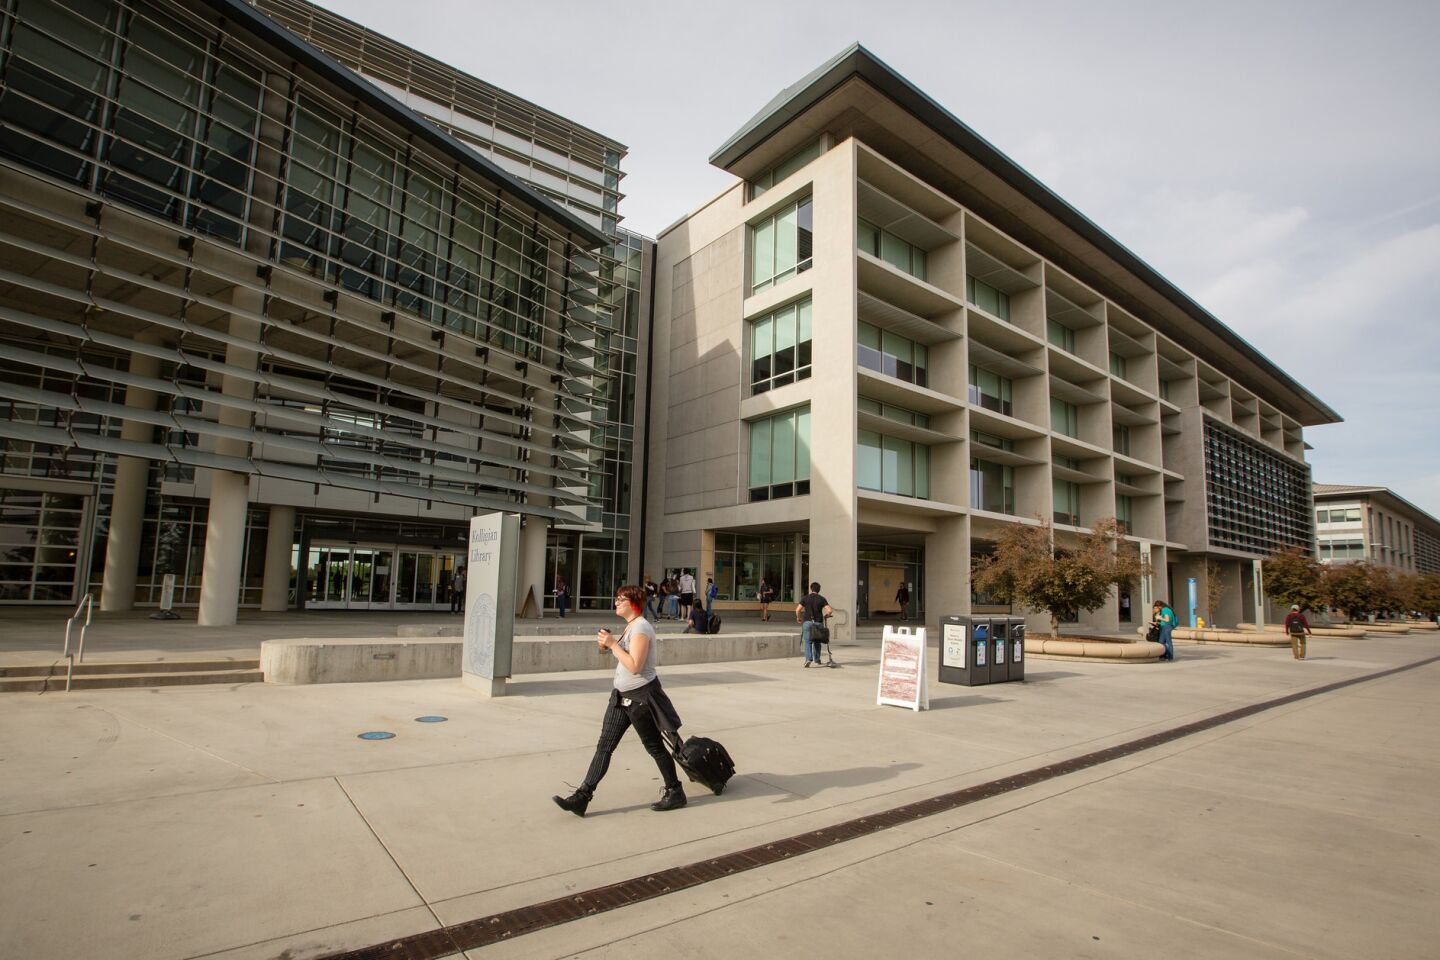 UC Merced expansion